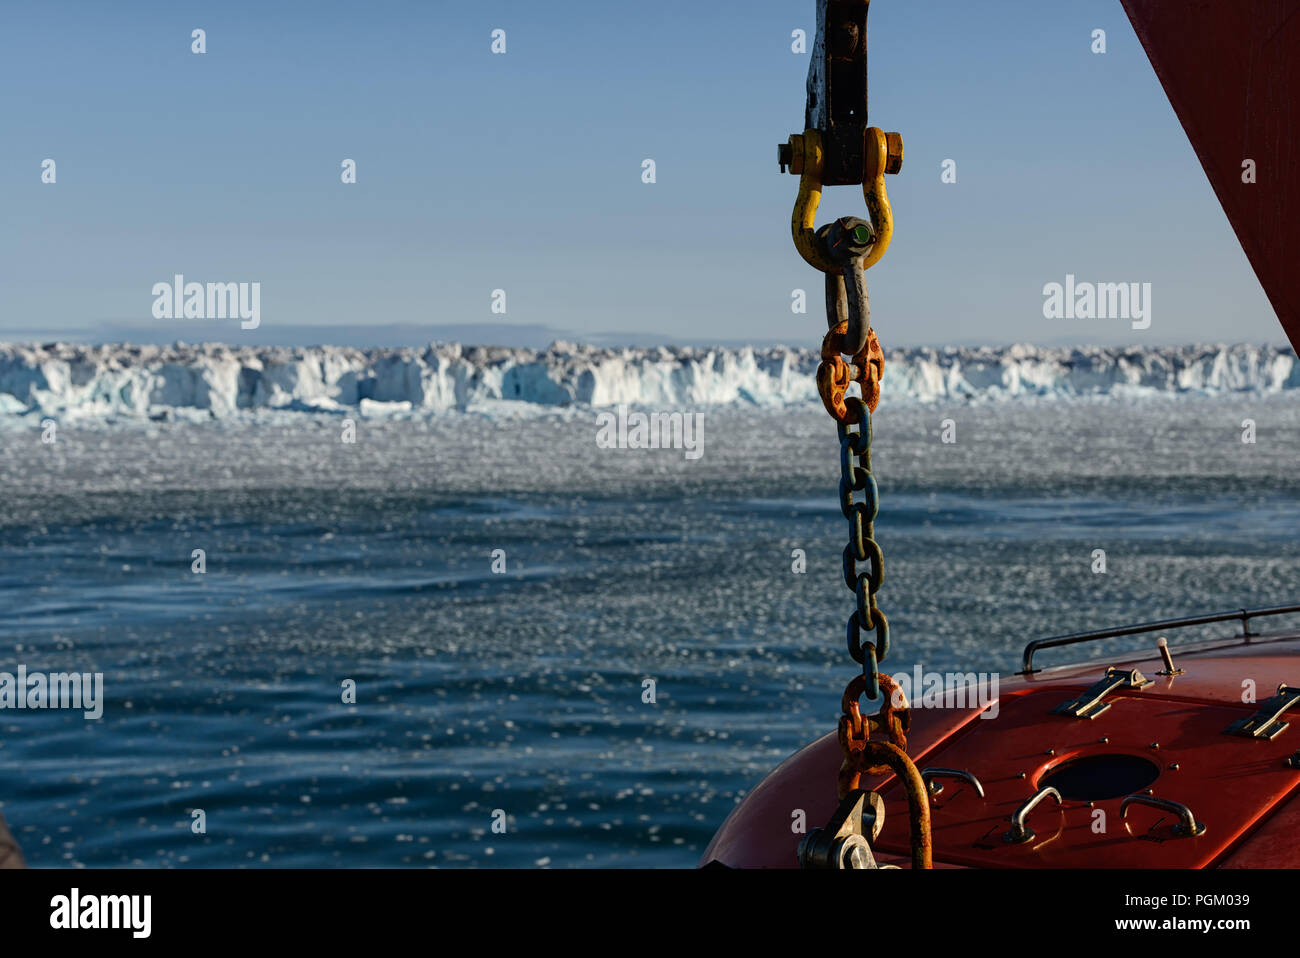 Chain and lifeboat of a cruiseship in front of the arctic ice cap Austfonna, Svalbard, Norway Stock Photo